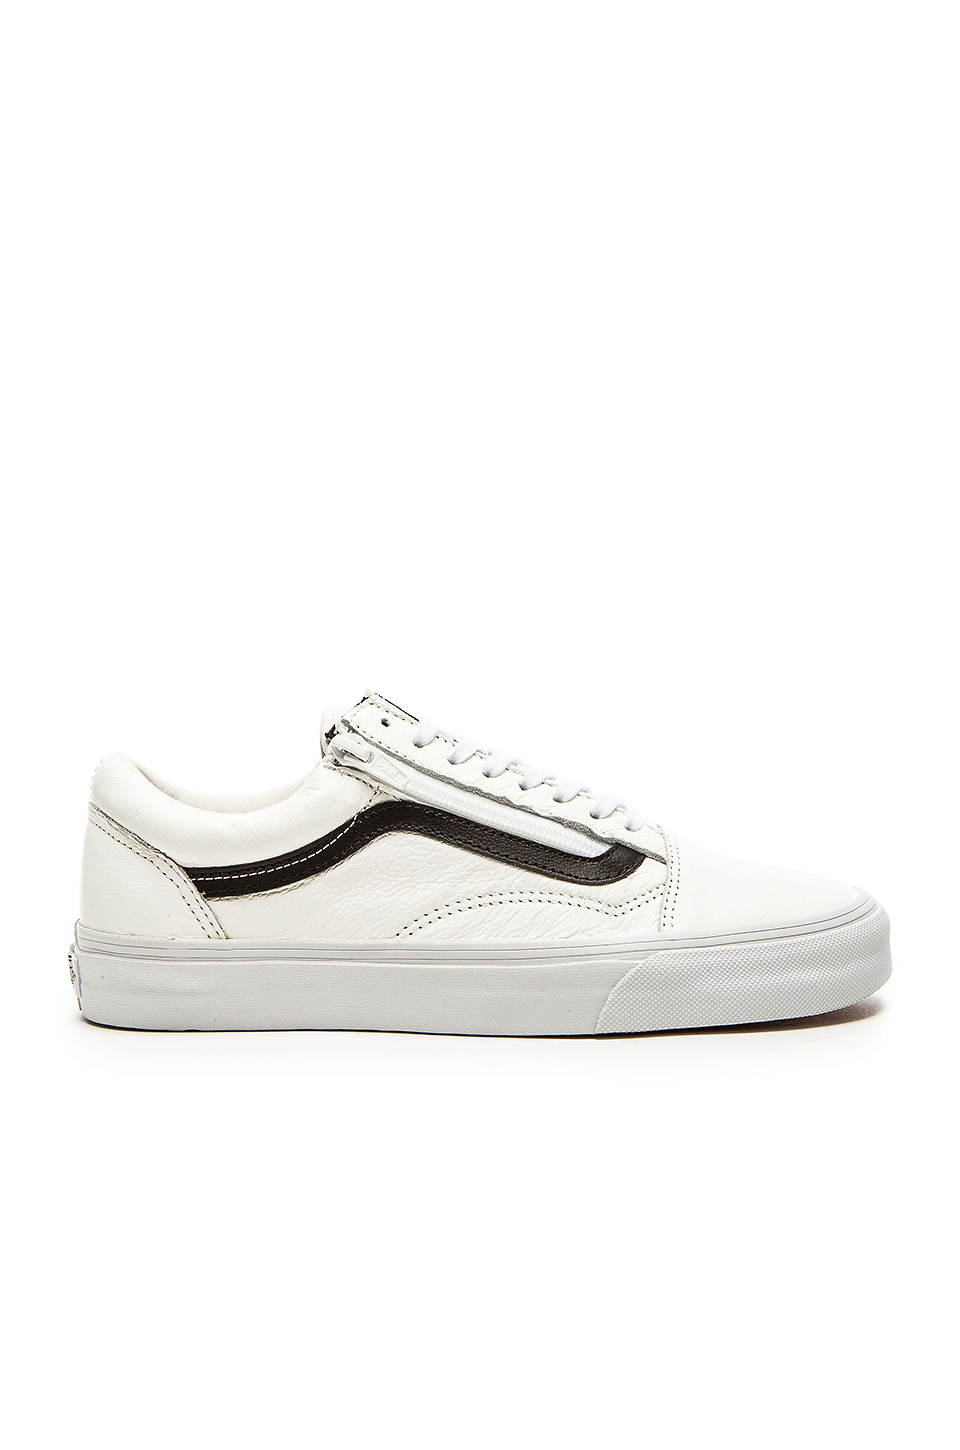 white leather vans with zipper